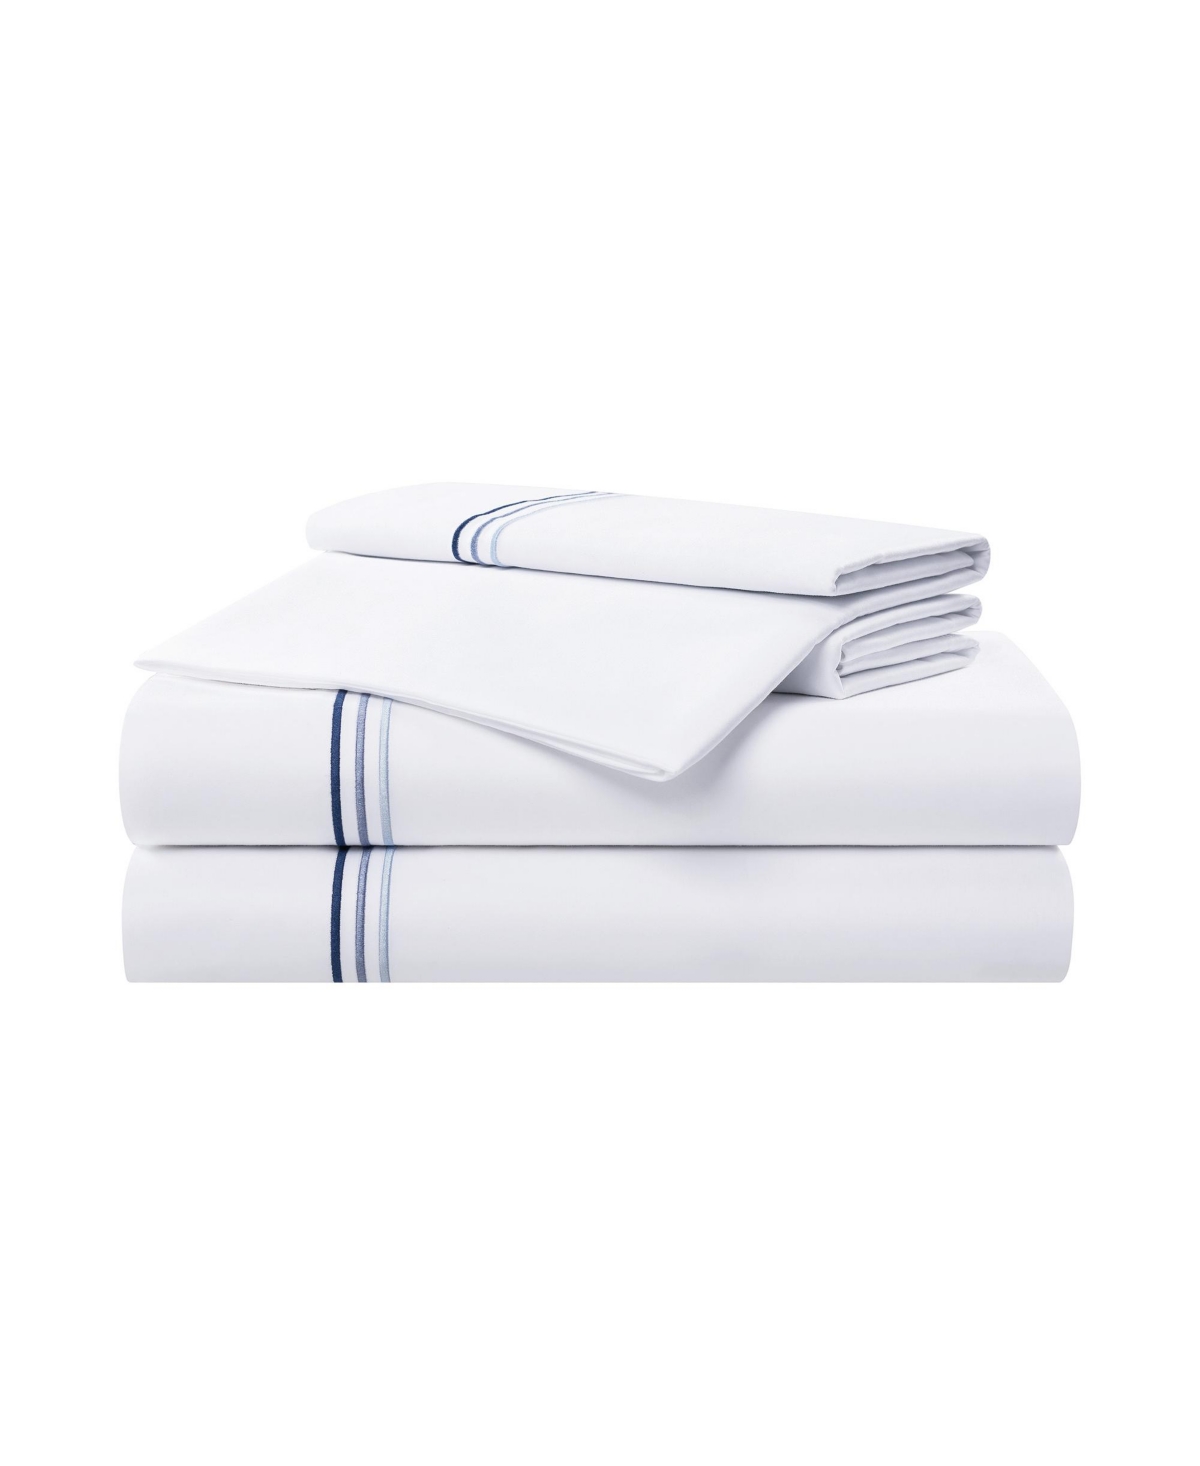 Aston And Arden Sateen Twin Sheet Set, 1 Flat Sheet, 1 Fitted Sheet, 2 Pillowcases, 600 Thread Count In Blue